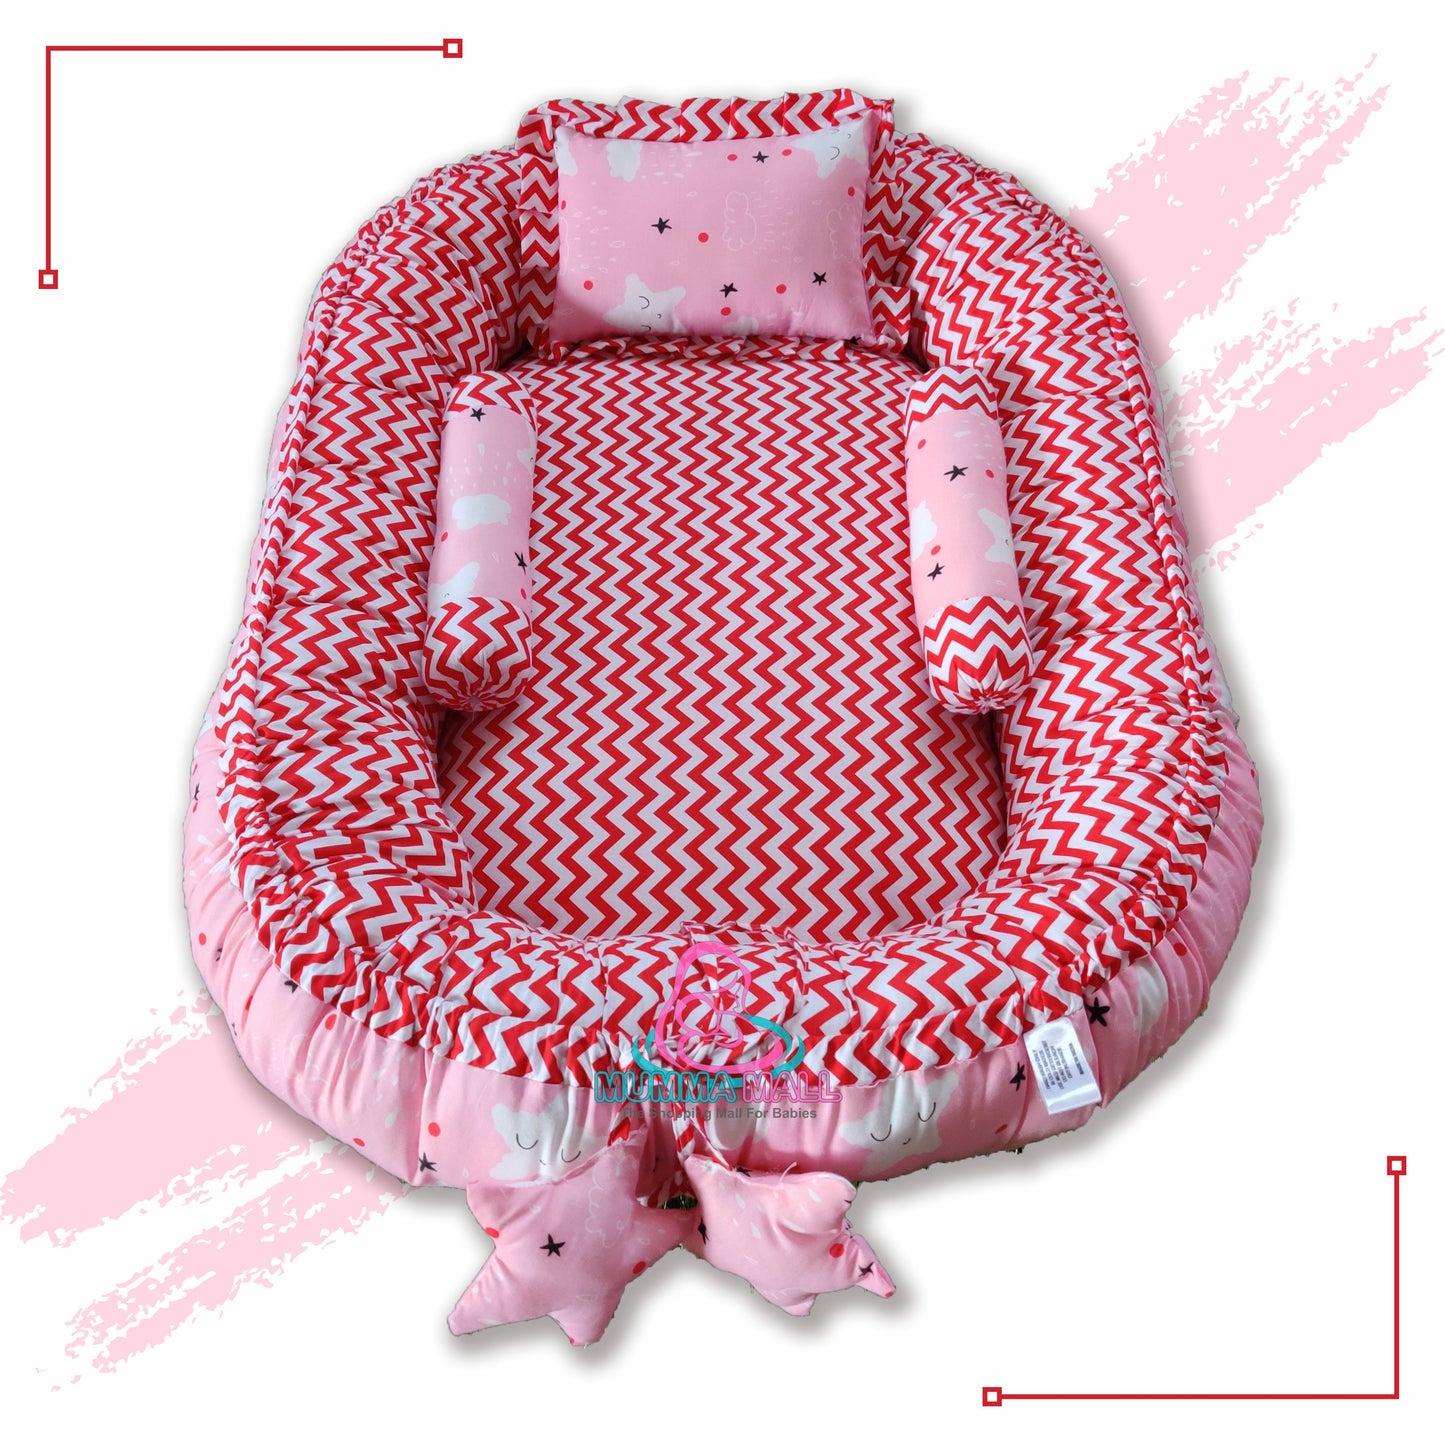 Baby nest bedding with blanket and set of 3 pillows as neck support, side support and toy (Pink and Red)